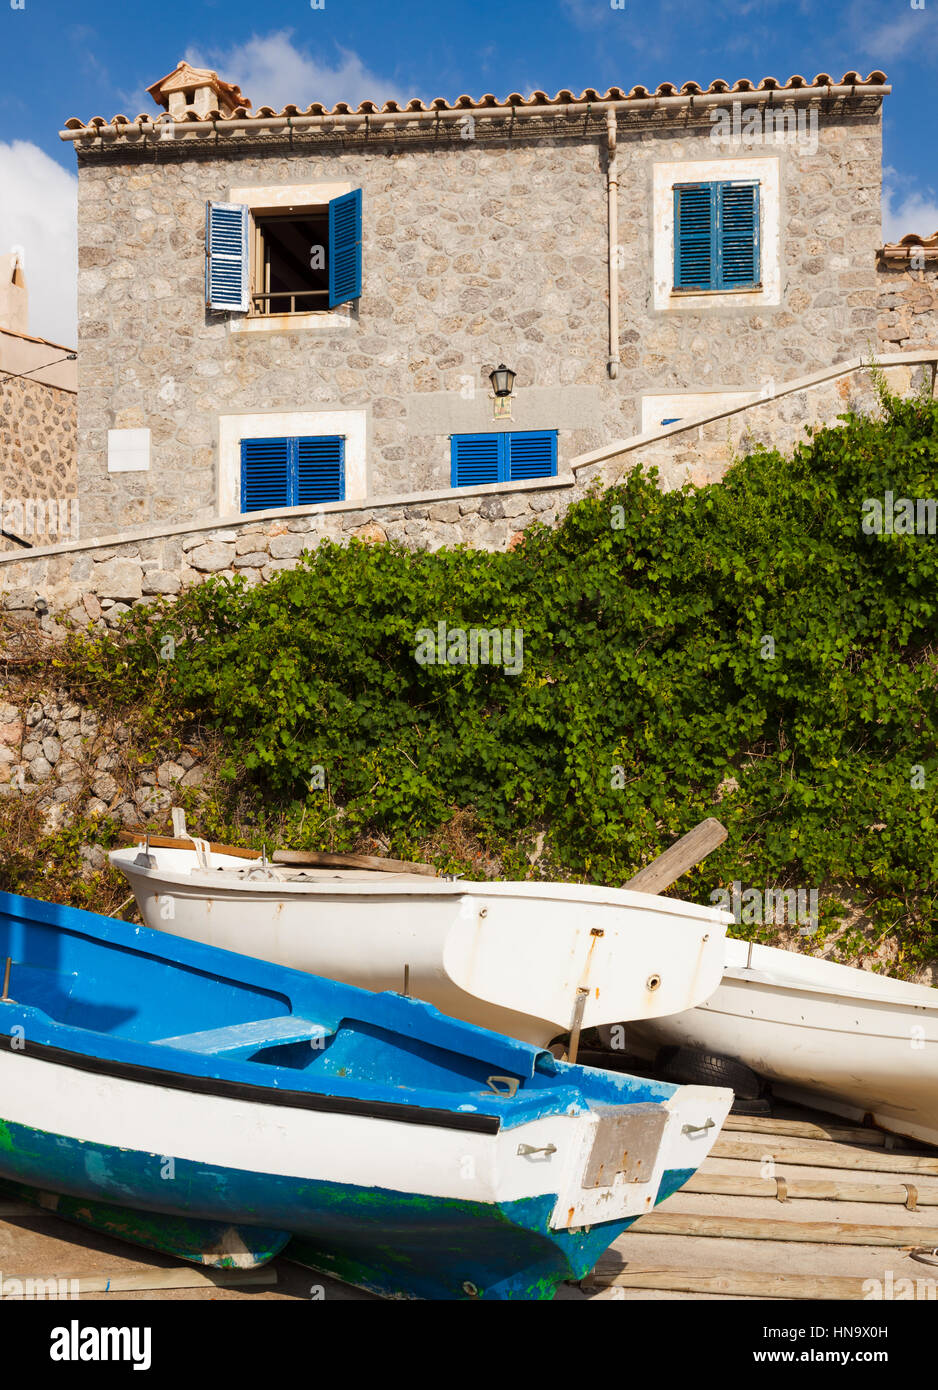 Waterfront house in small fishing village in Majorca Spain with blue shutters and a blue boat in foreground. Stock Photo